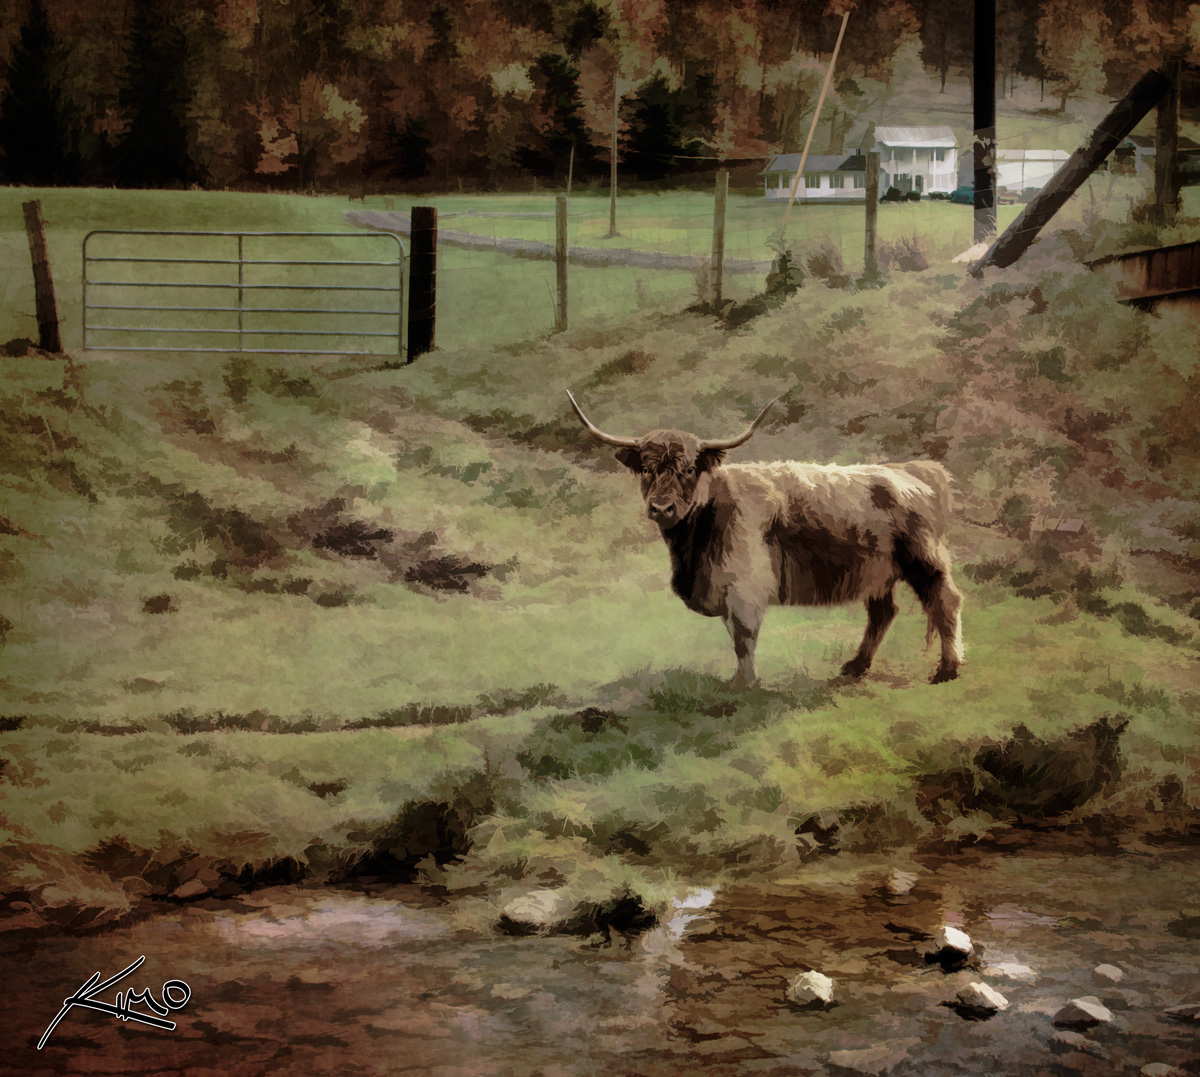 The Hairy Cow from West Virgina